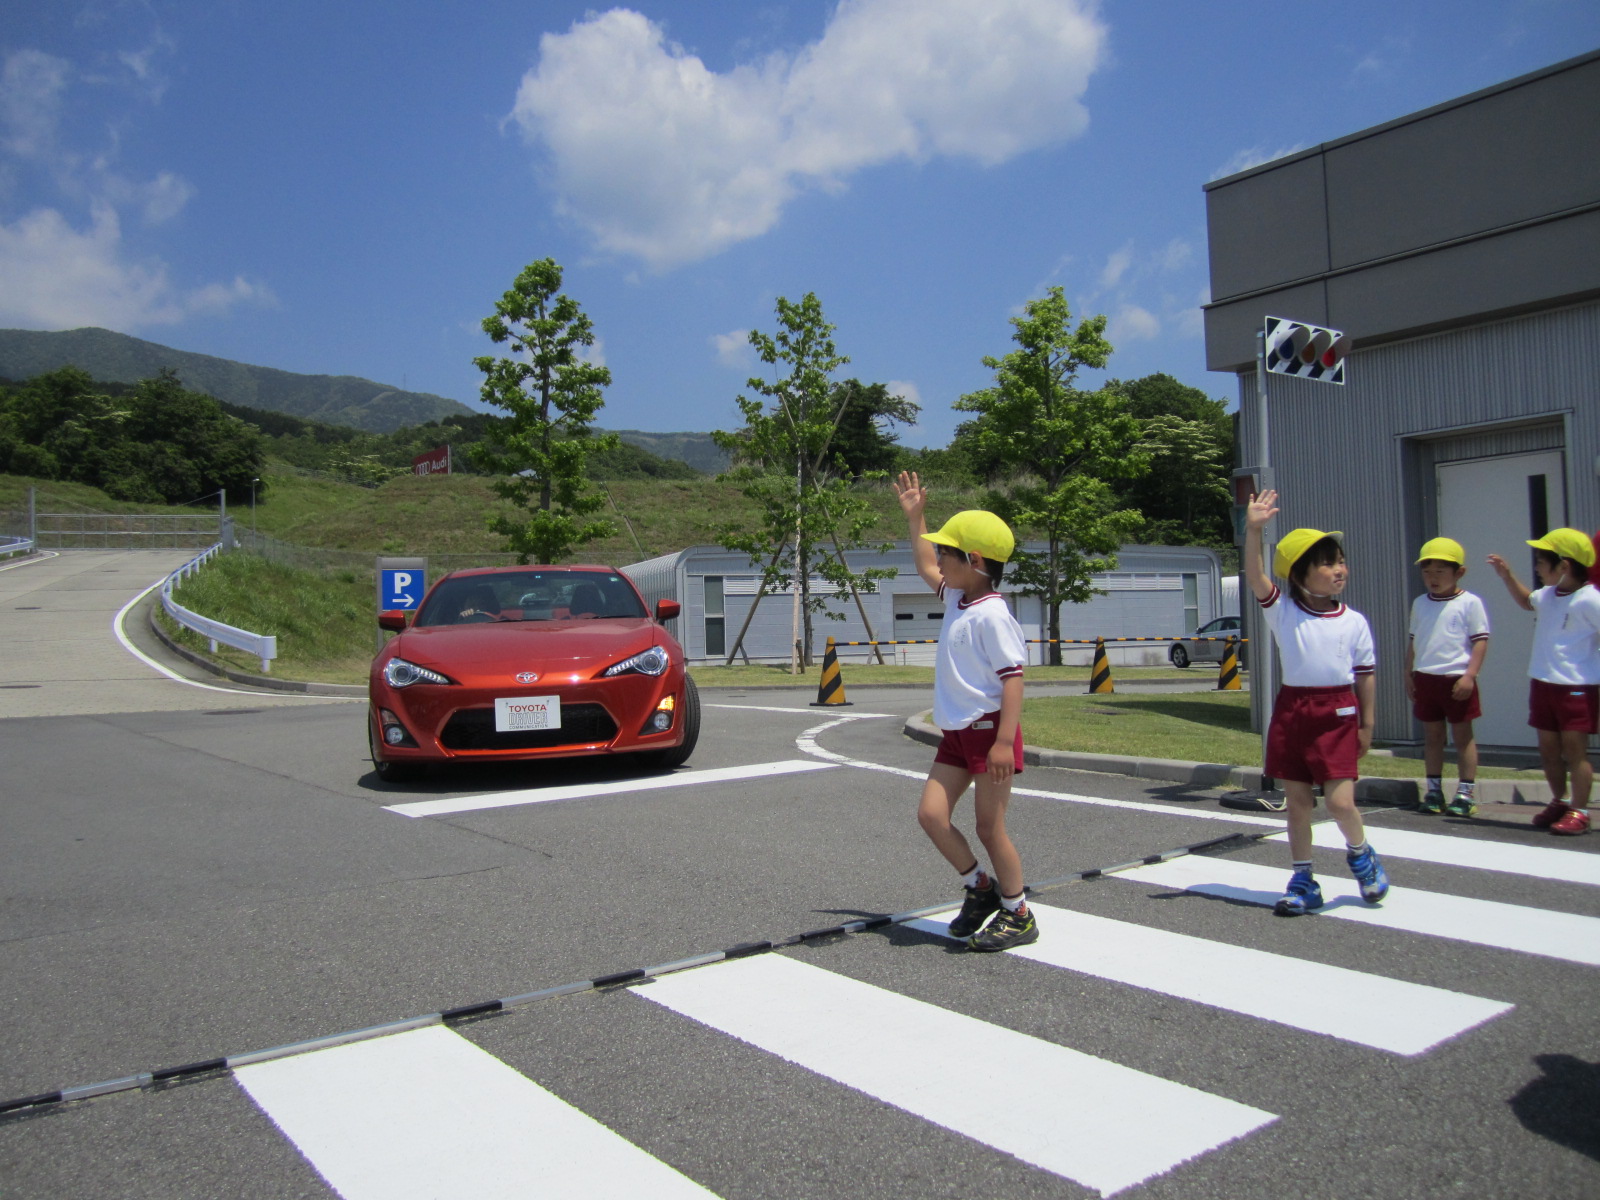 The 9th Toyota Safety School in 'mobilitas'